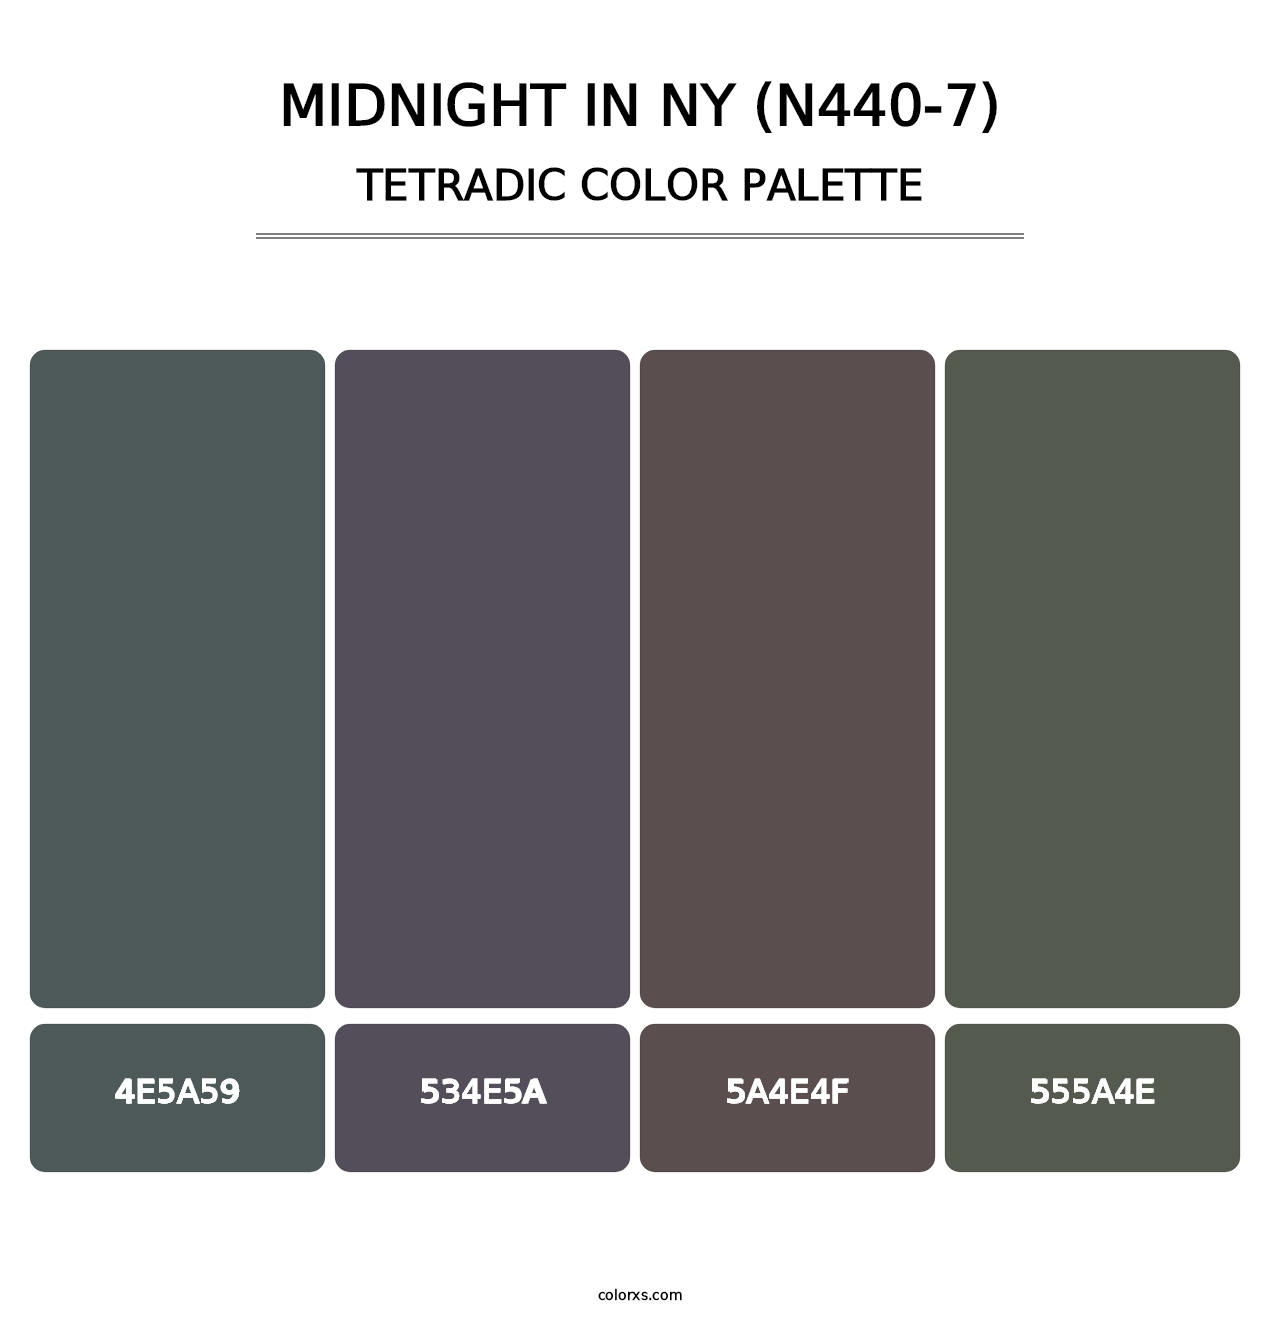 Midnight In Ny (N440-7) - Tetradic Color Palette